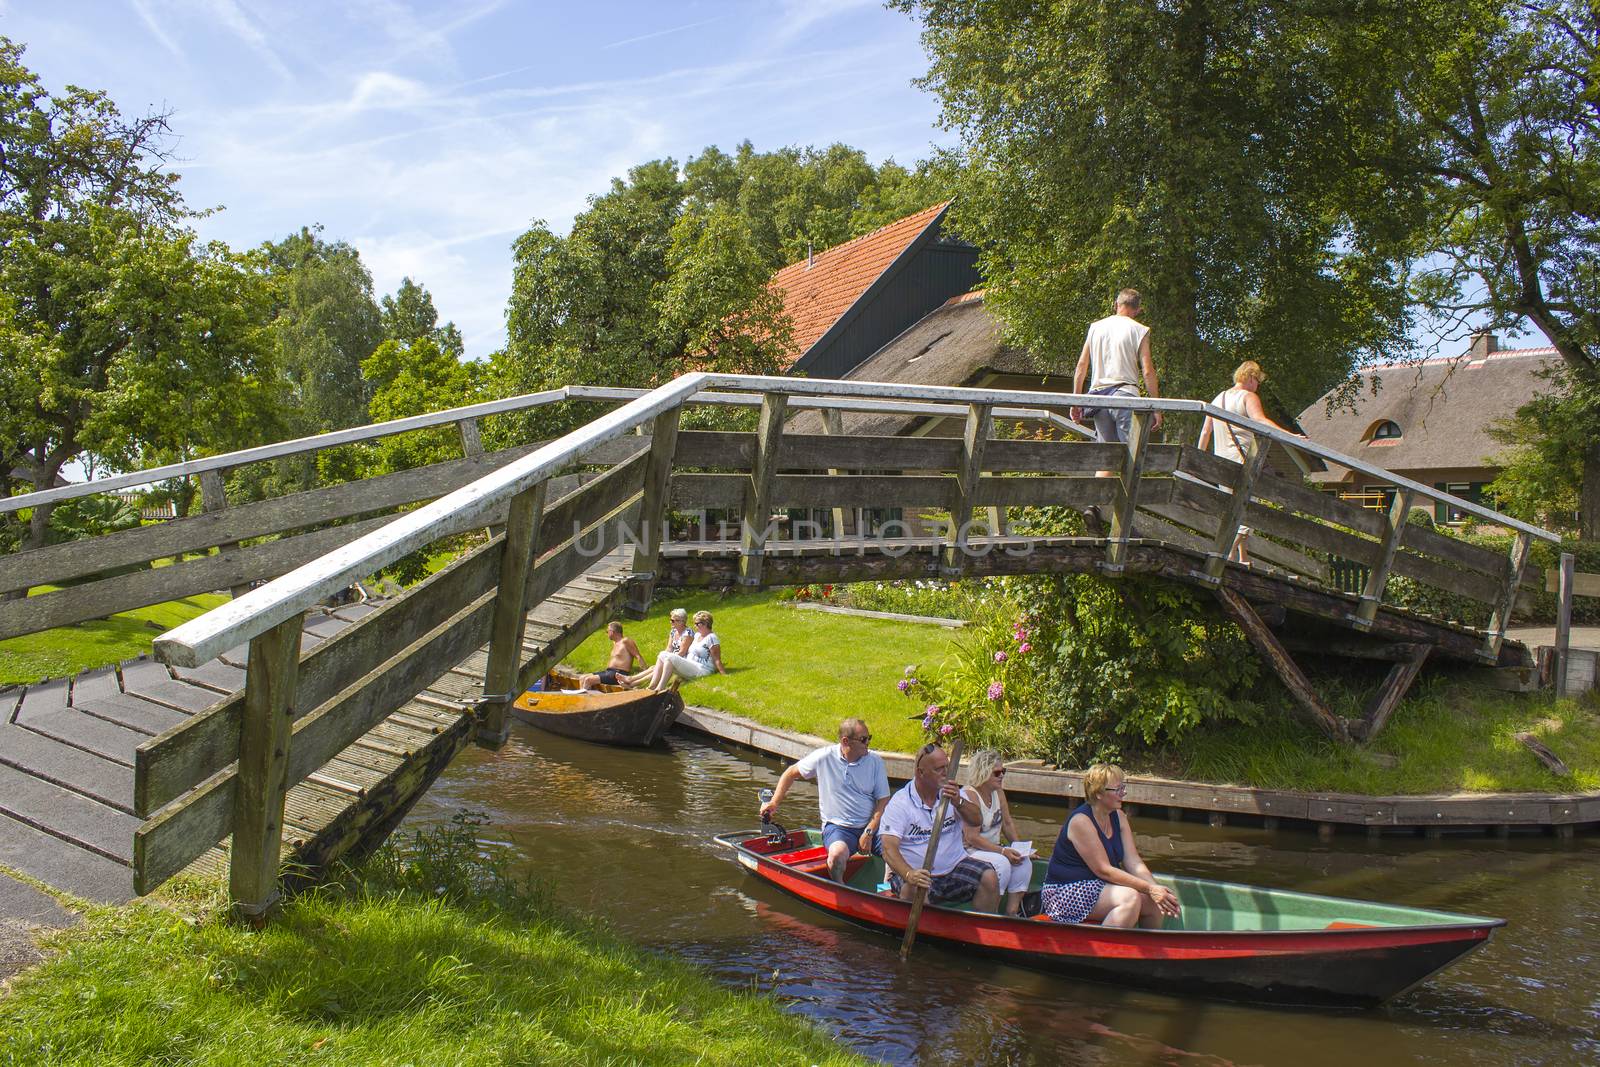 GIETHOORN, NETHERLANDS - AUGUST 05, 2015: Unknown visitors in the sightseeing boating trip in a canal in Giethoorn. The beautiful houses and gardening city is know as "Venice of the North".